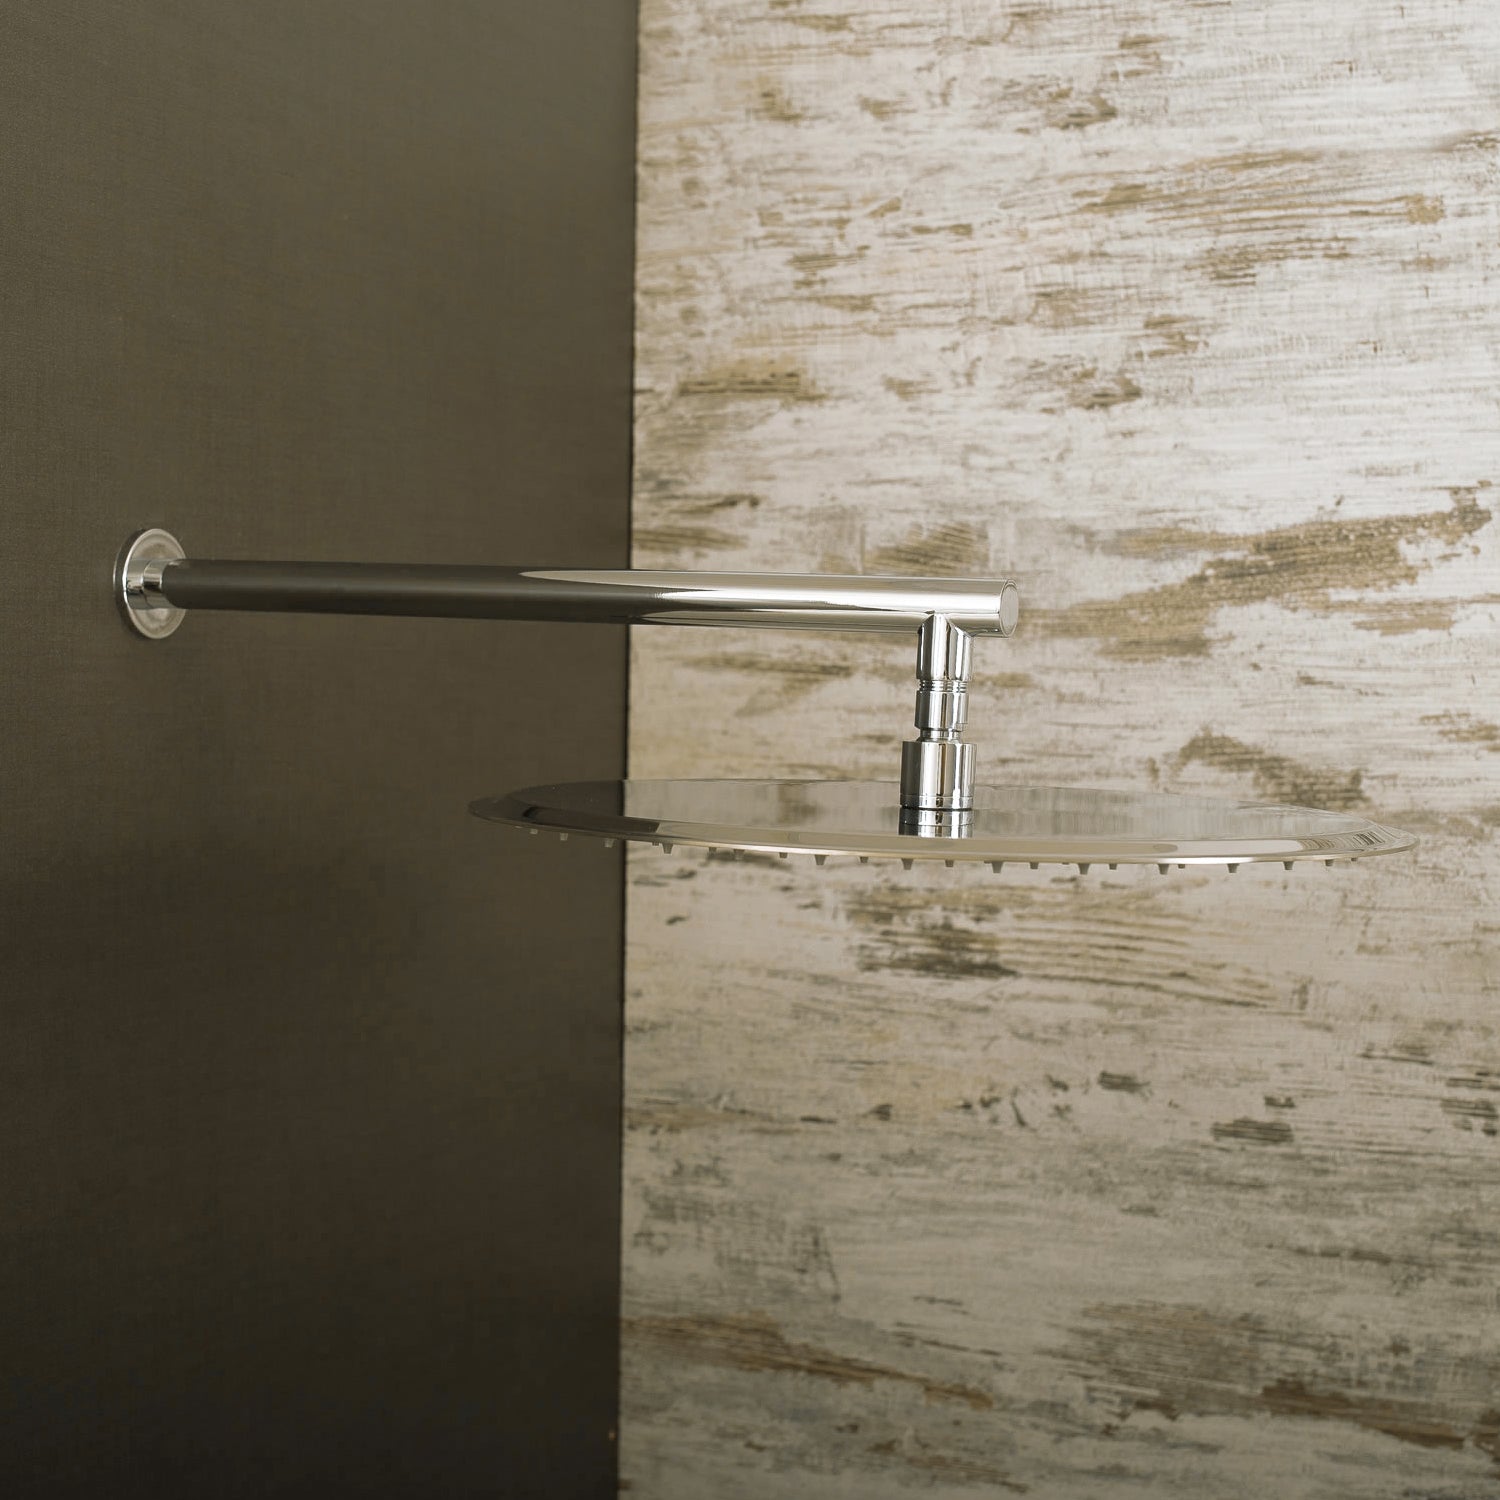 DAX Round Shower Arm, Brass Body, Wall Mount, Chrome Finish, 18 Inches (D-F04-18-CR)